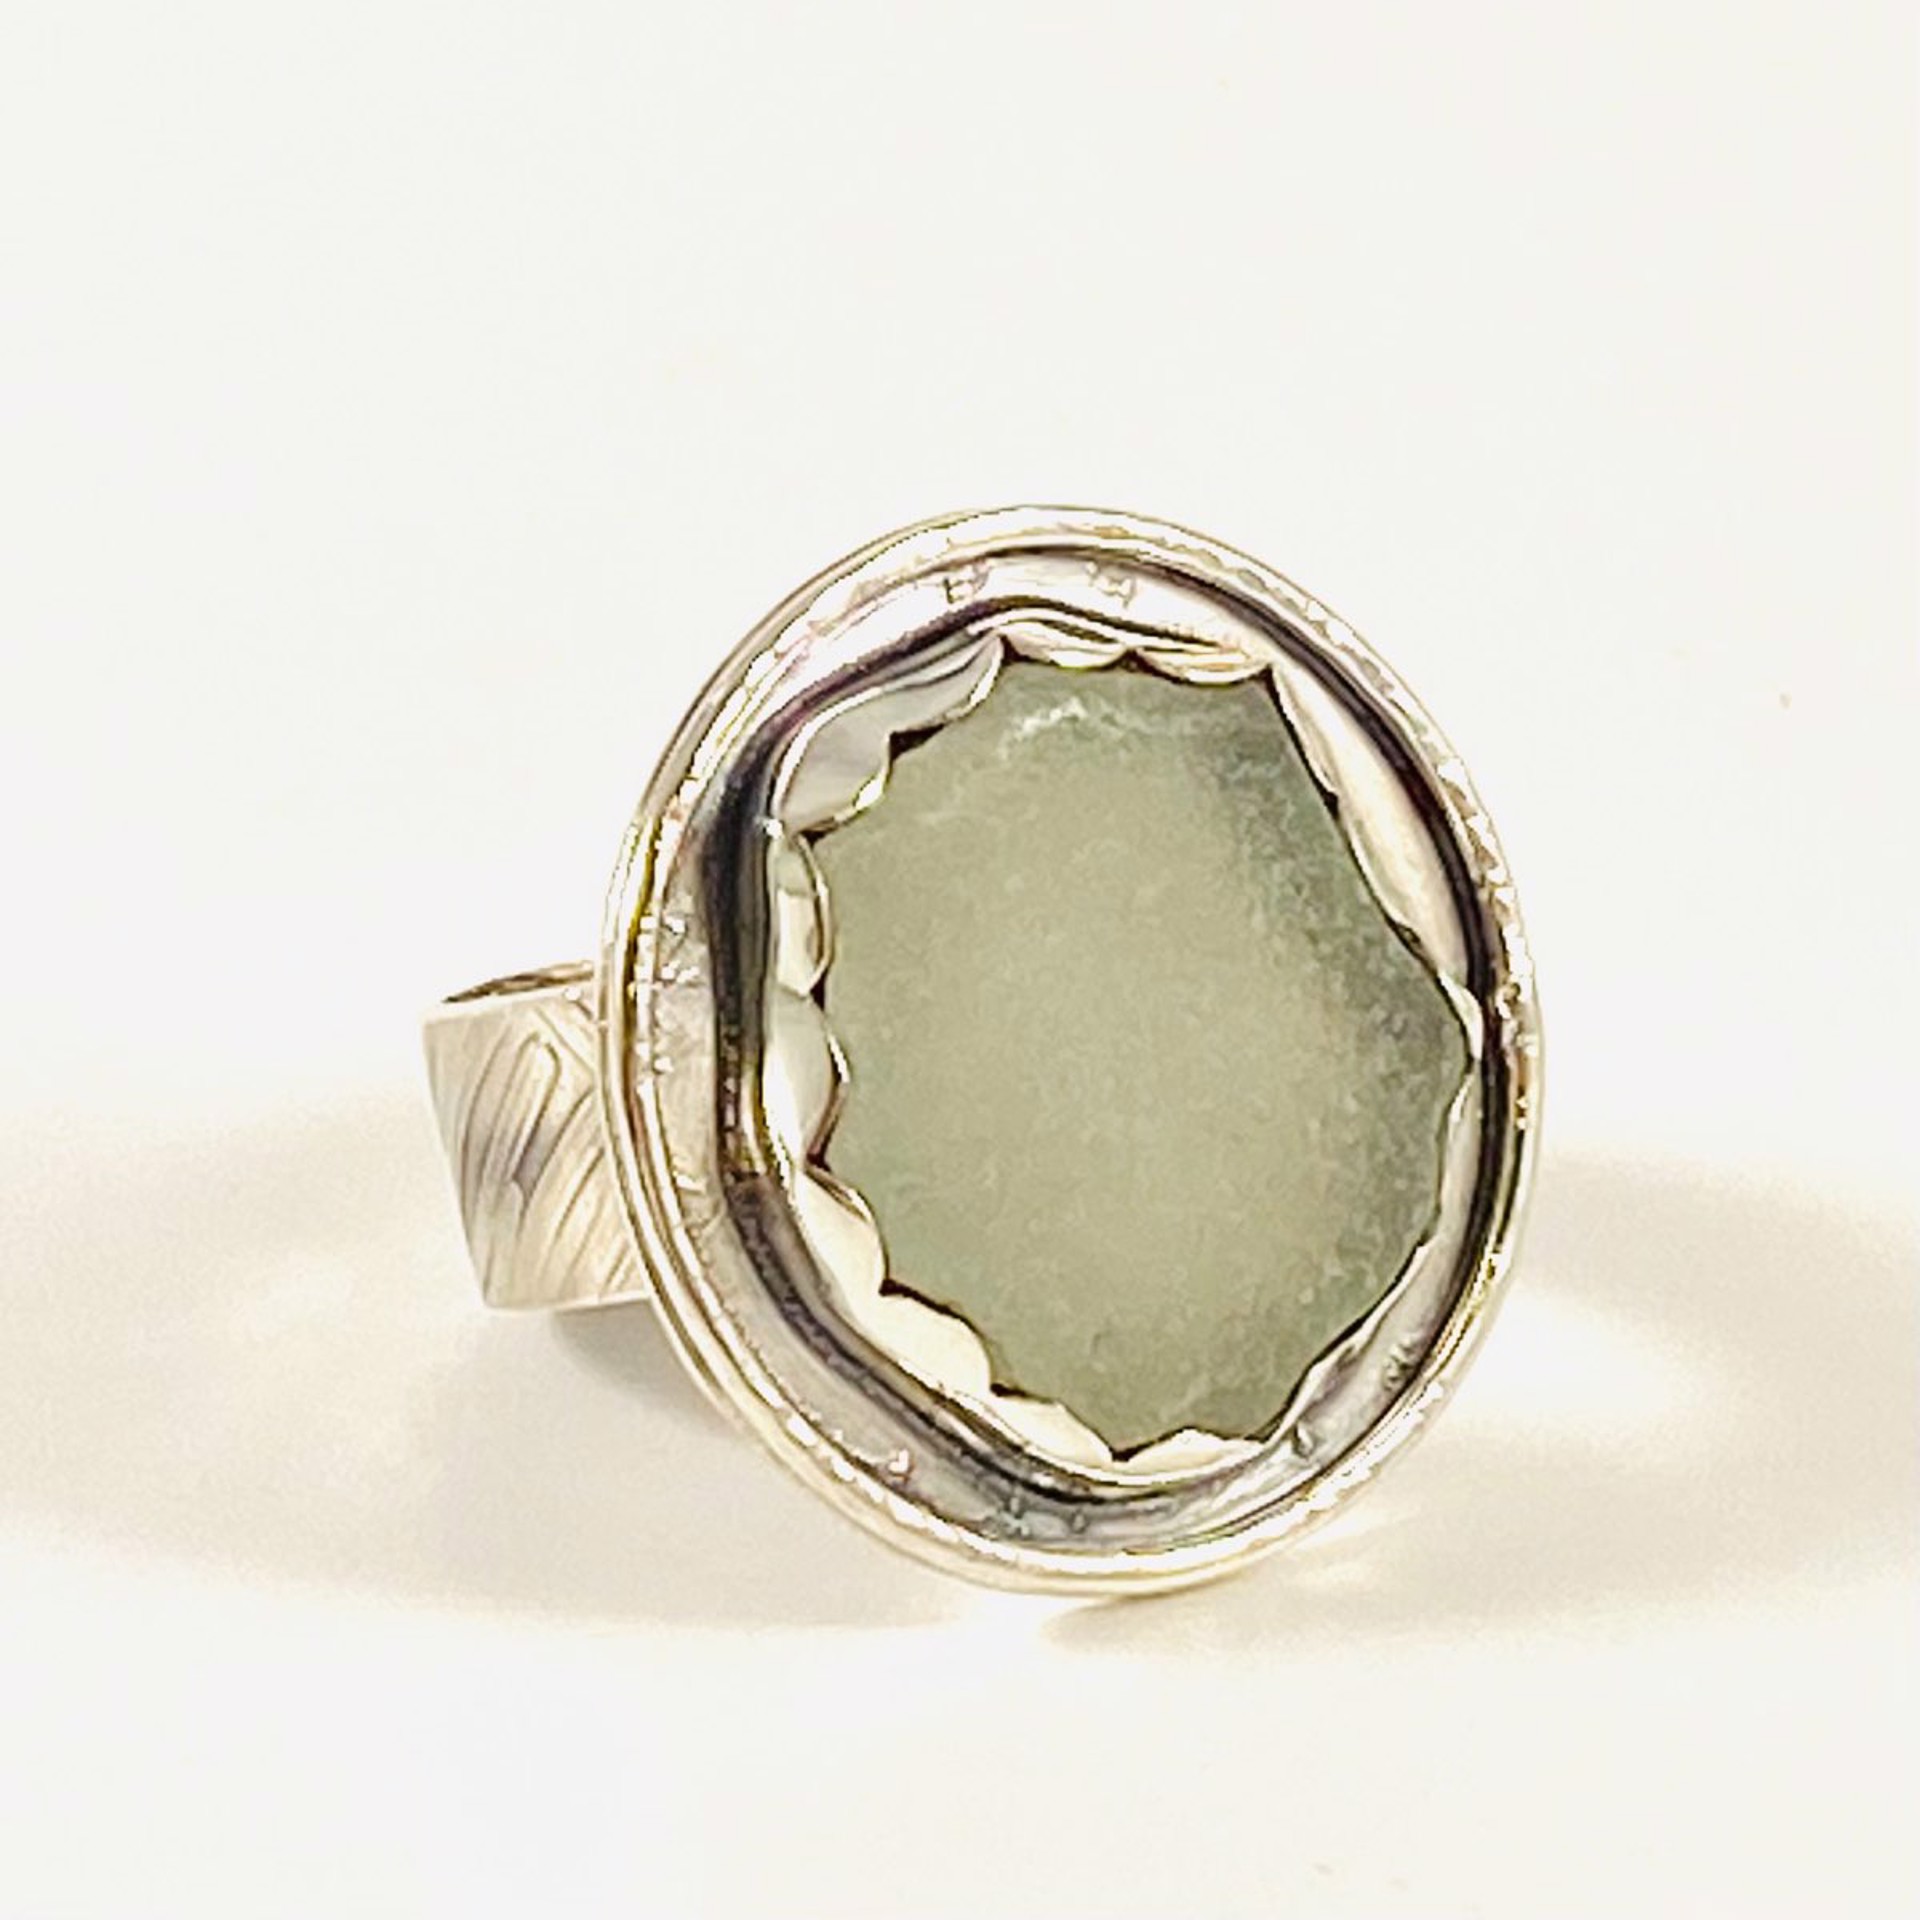 Round White Sea Glass Ring sz7.75 AB22-21 by Anne Bivens